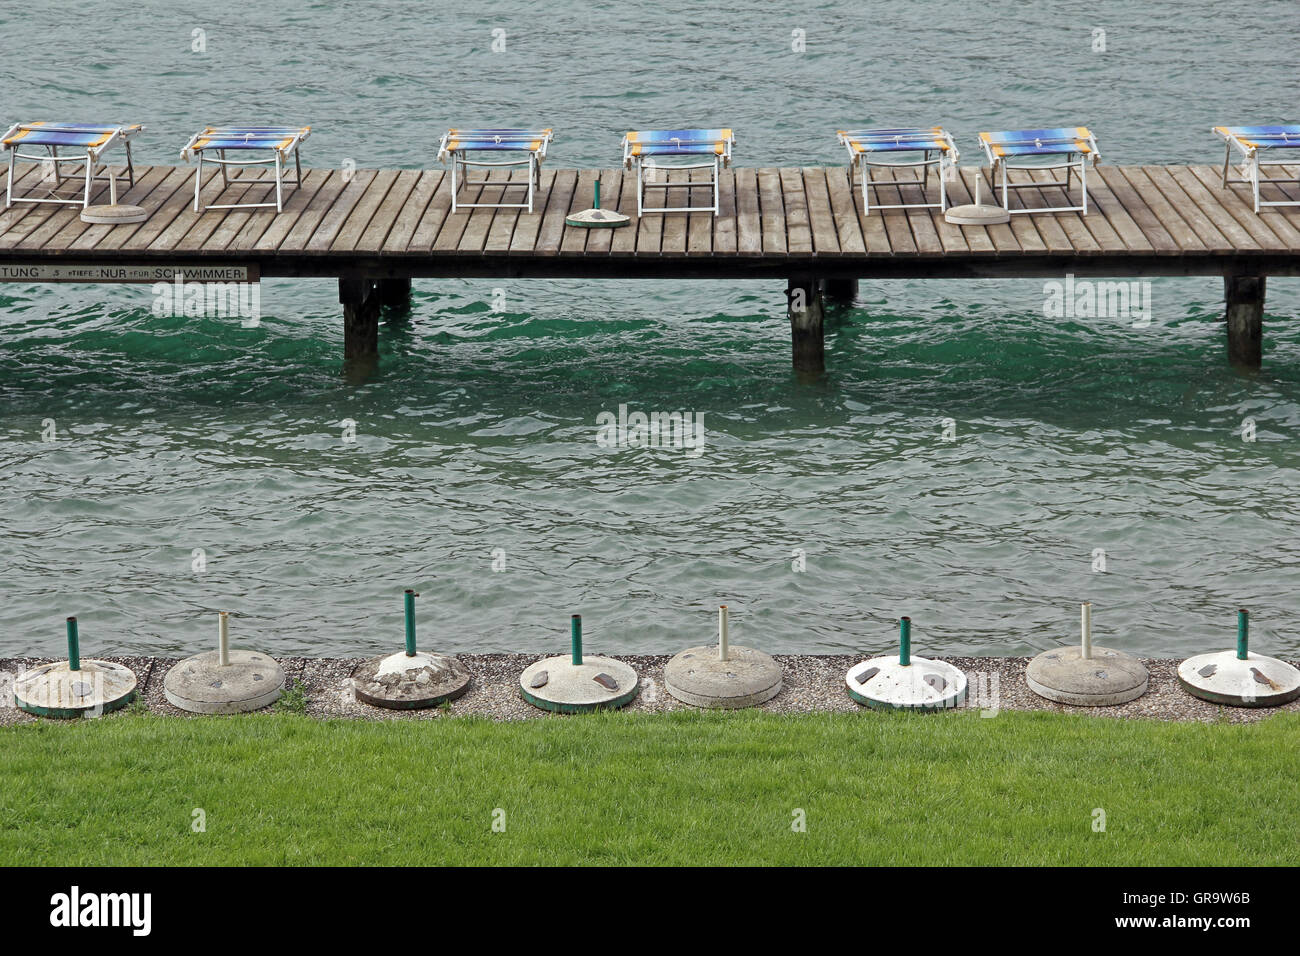 Bathing Jetty At The Wörthersee In Carinthia Stock Photo